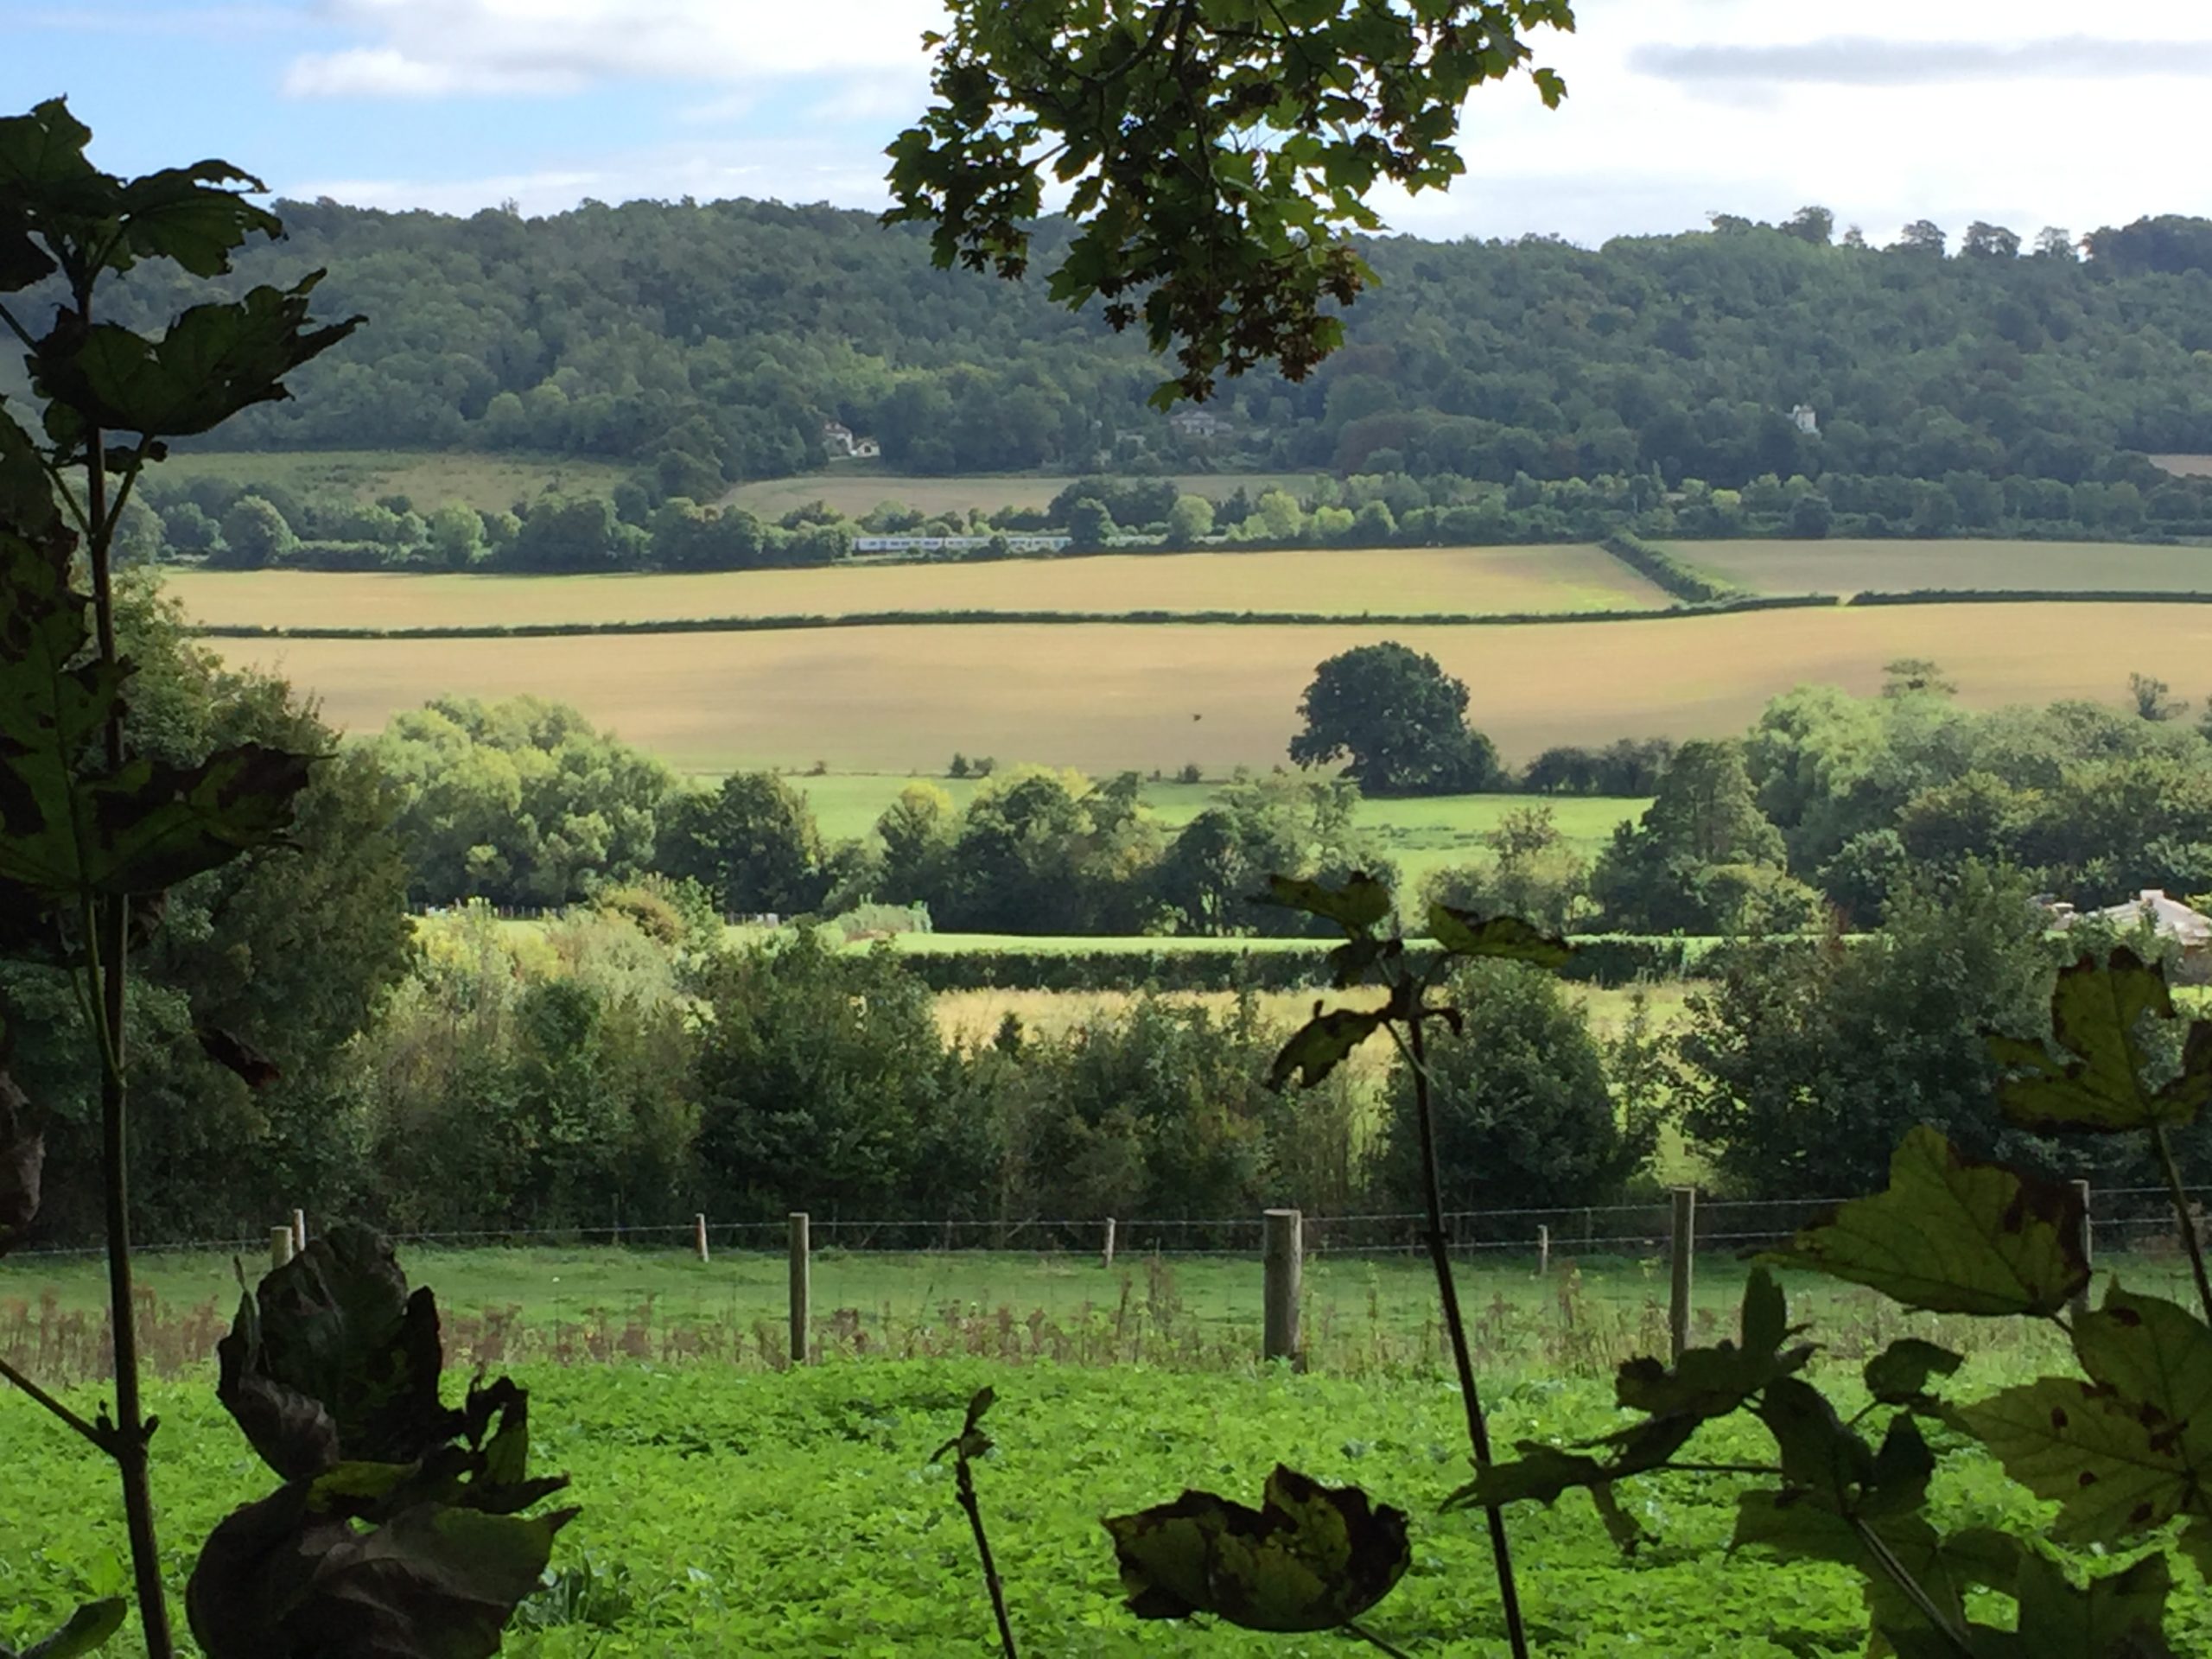 Fields in foreground and woodland behind